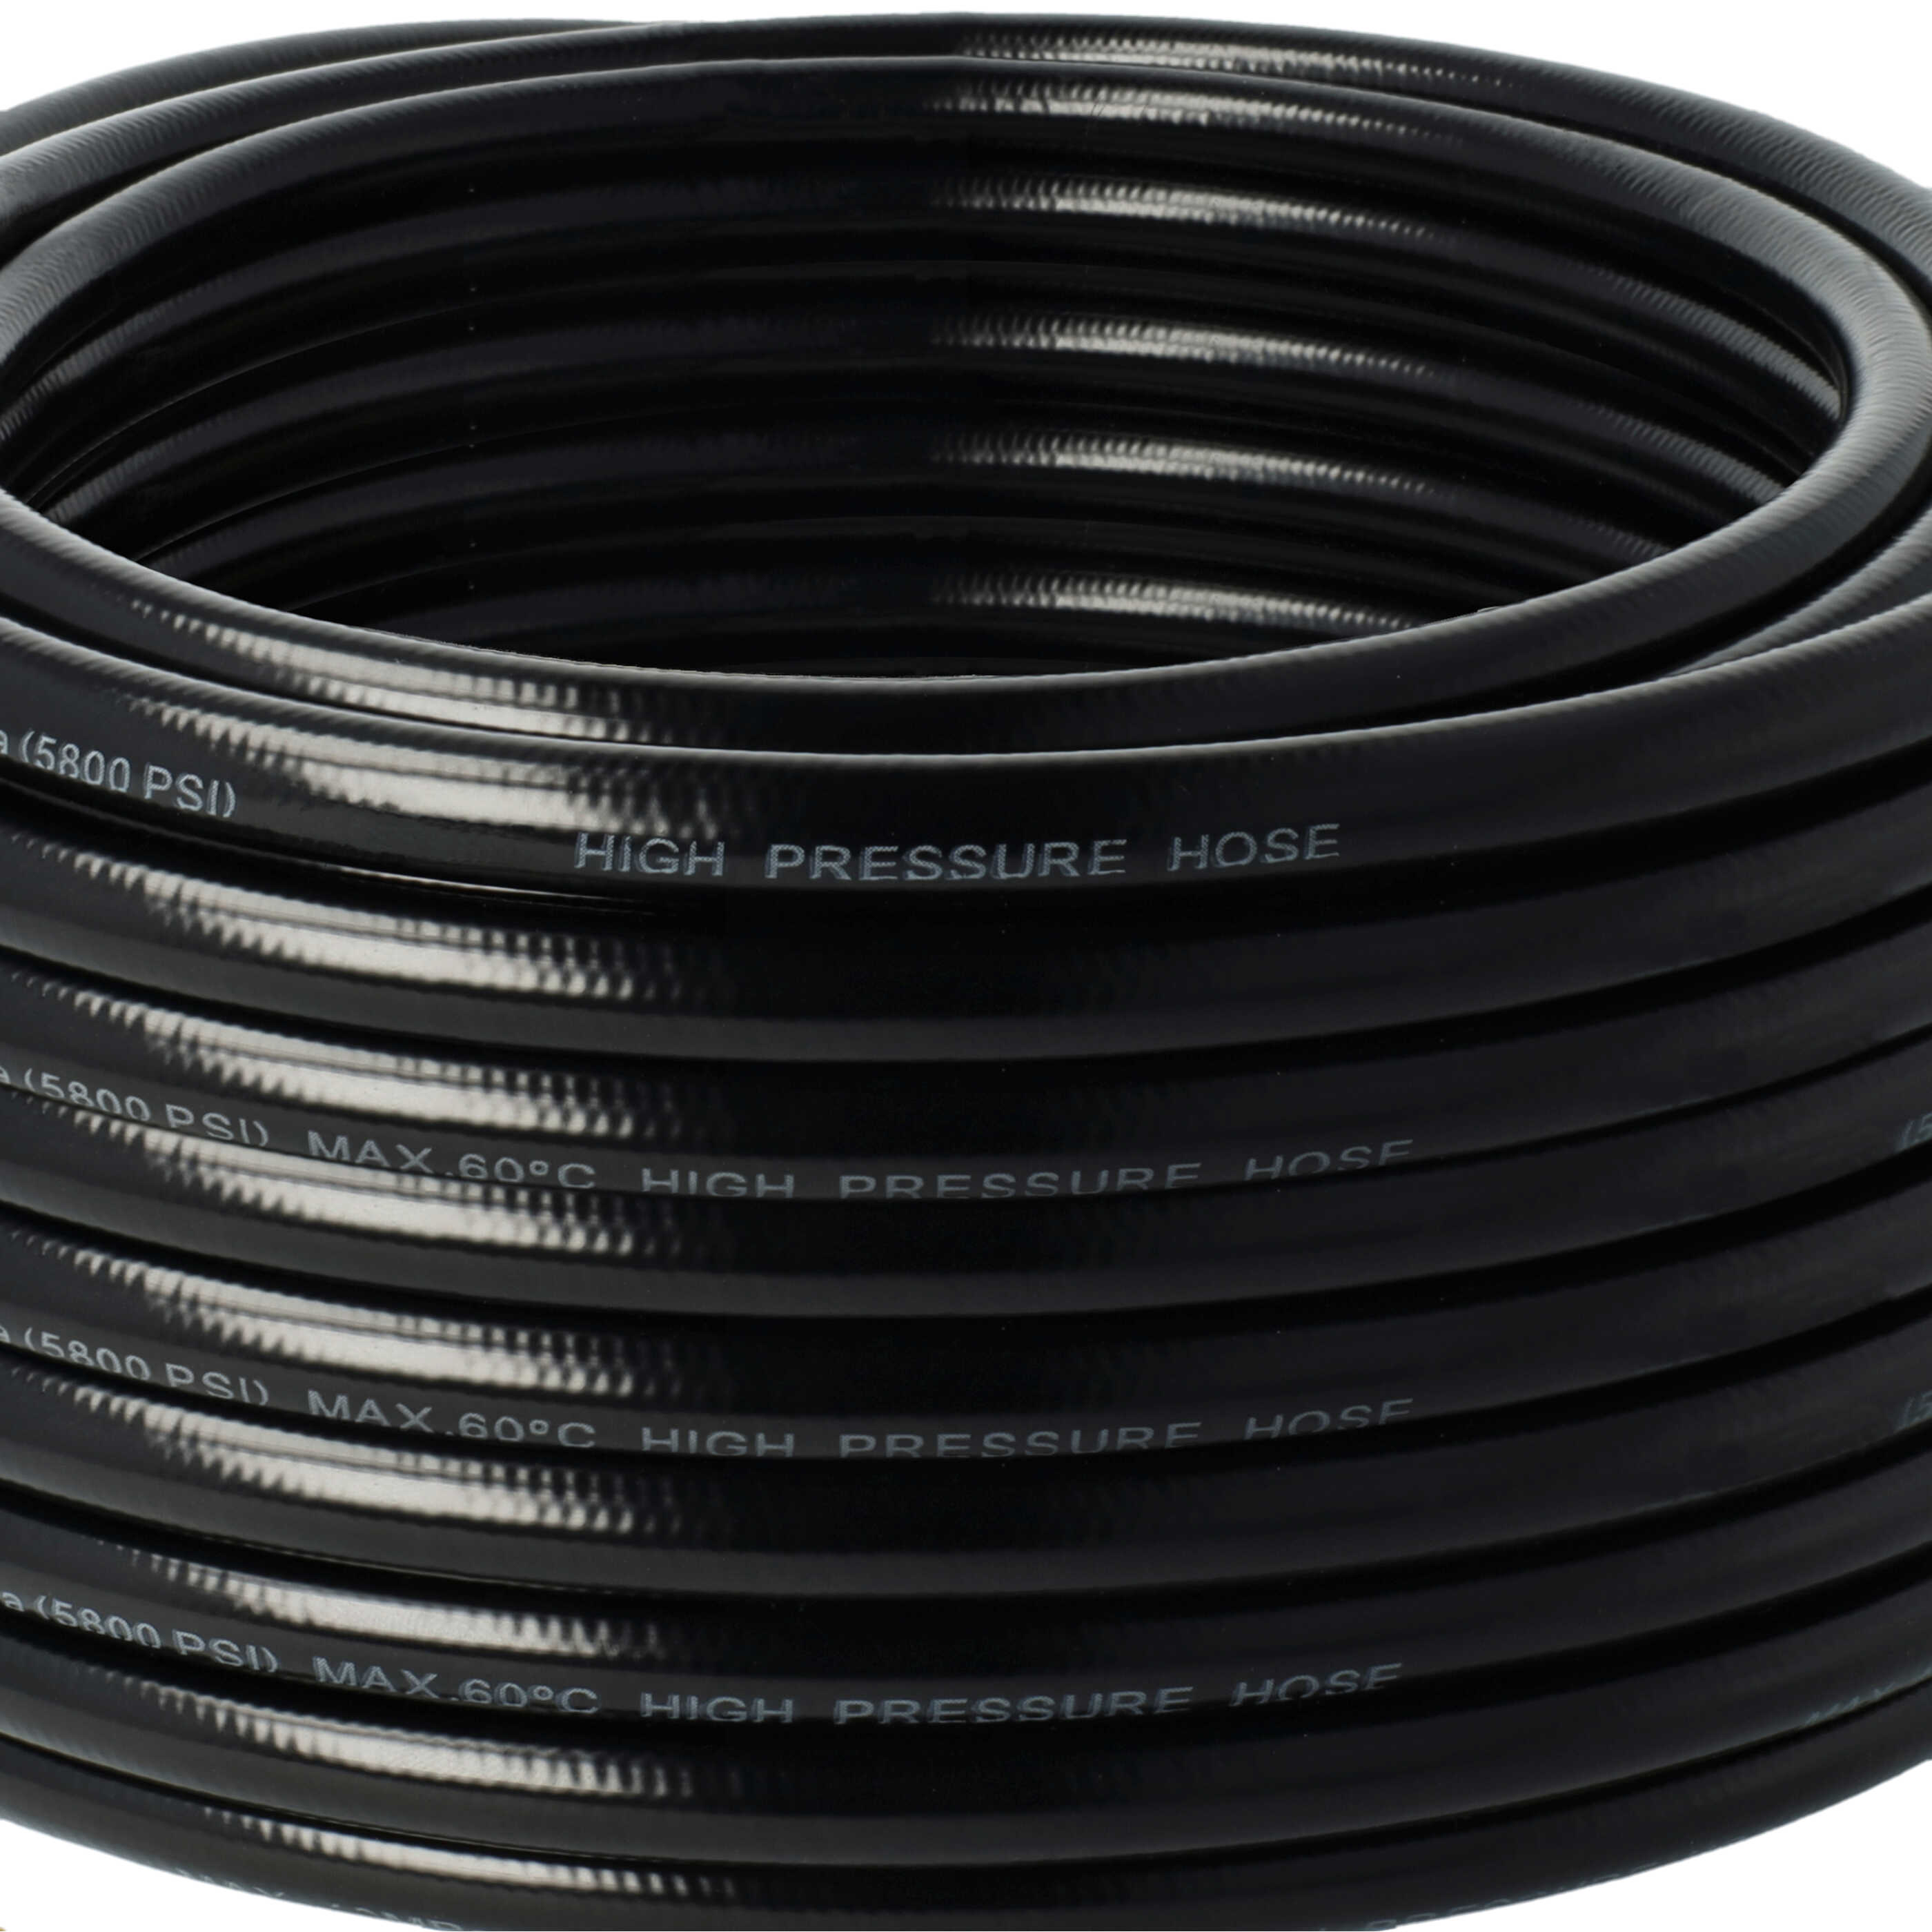 vhbw 30 m Extension Hose High-Pressure Cleaner with M22 x 1.5 Threaded Connection Black